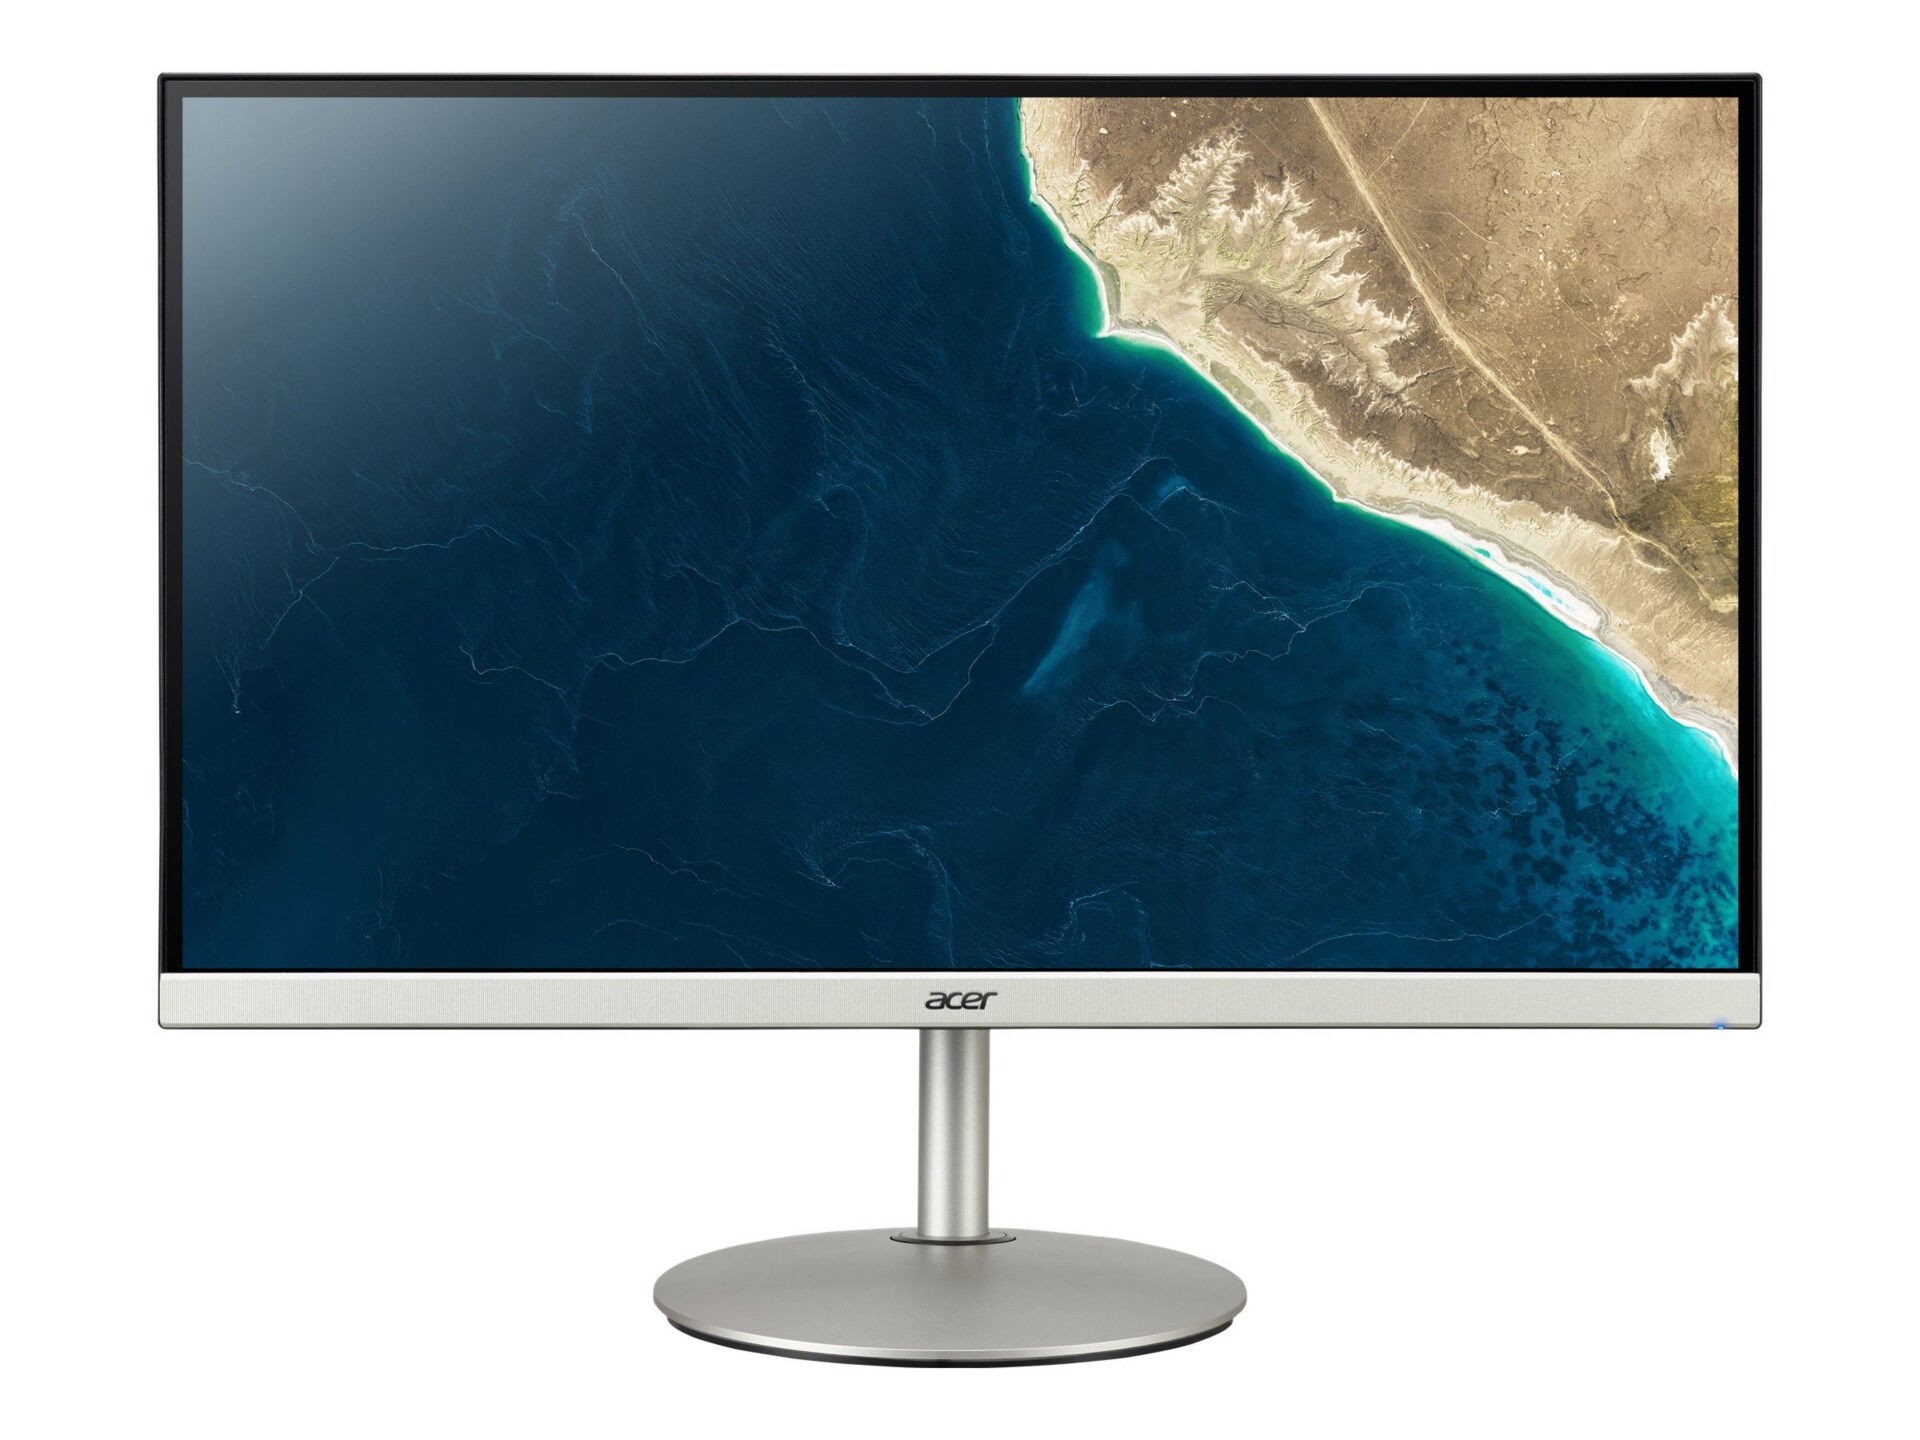 Acer CB272U smiiprx - LED monitor - 27" - HDR